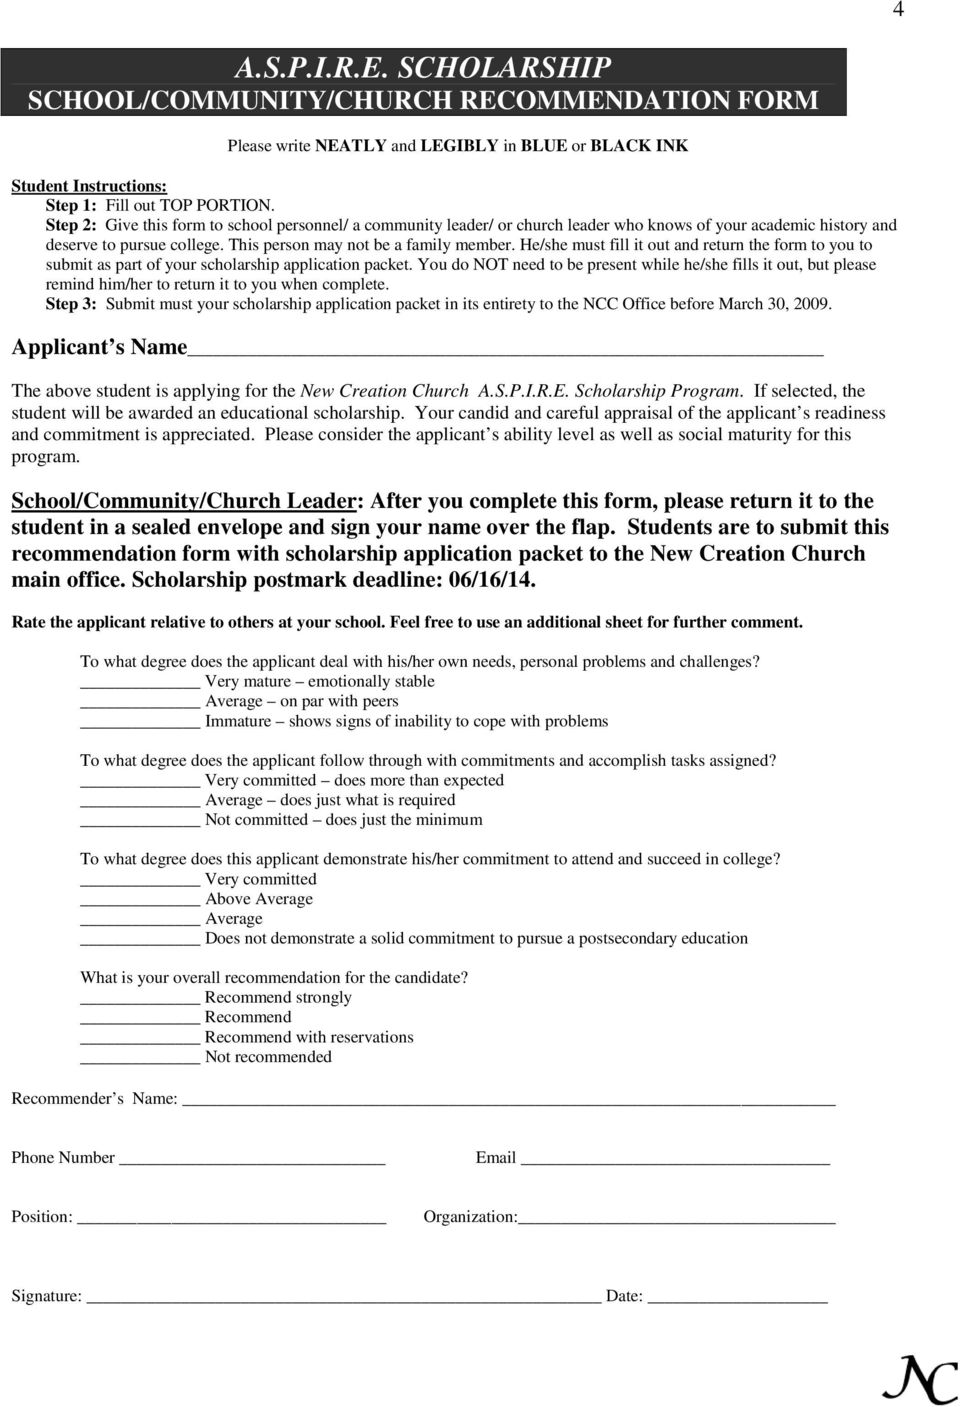 He/she must fill it out and return the form to you to submit as part of your scholarship application packet.